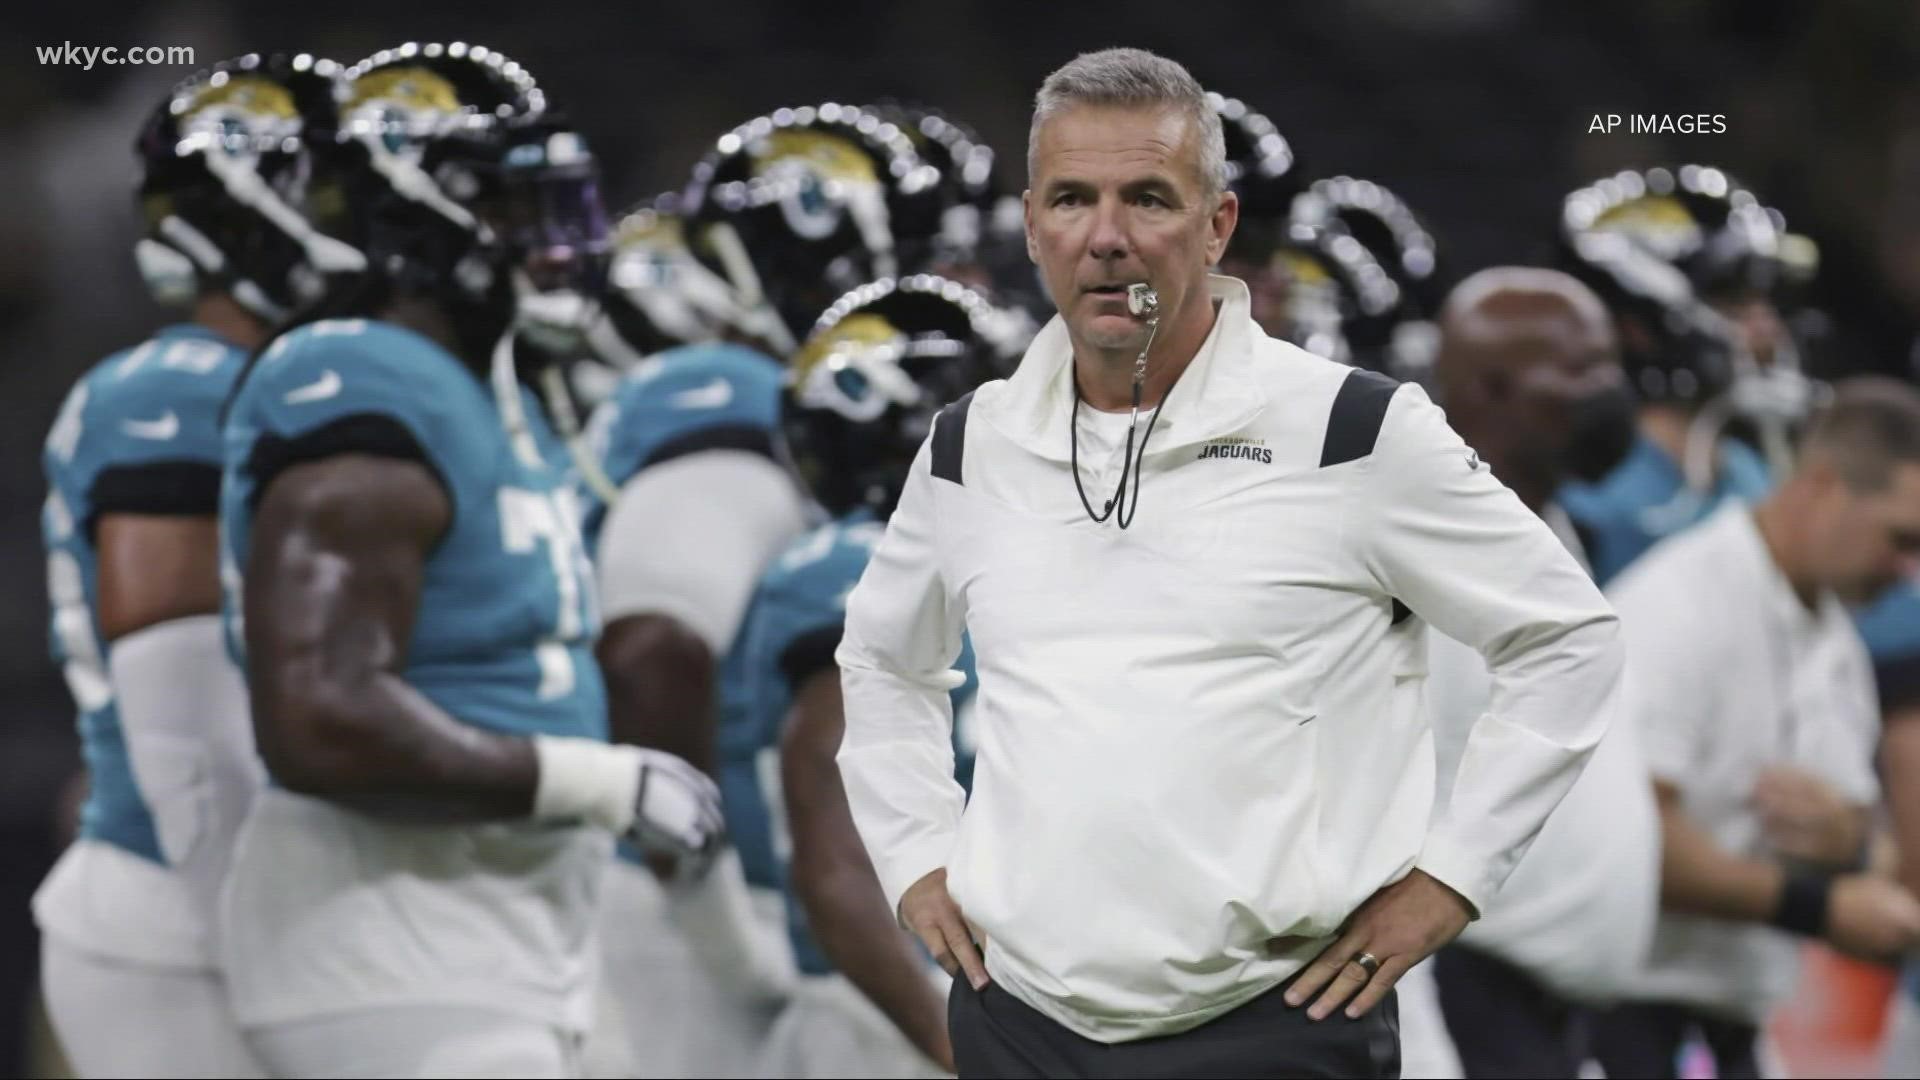 The Jacksonville Jaguars fired Meyer just 13 games into his first season.